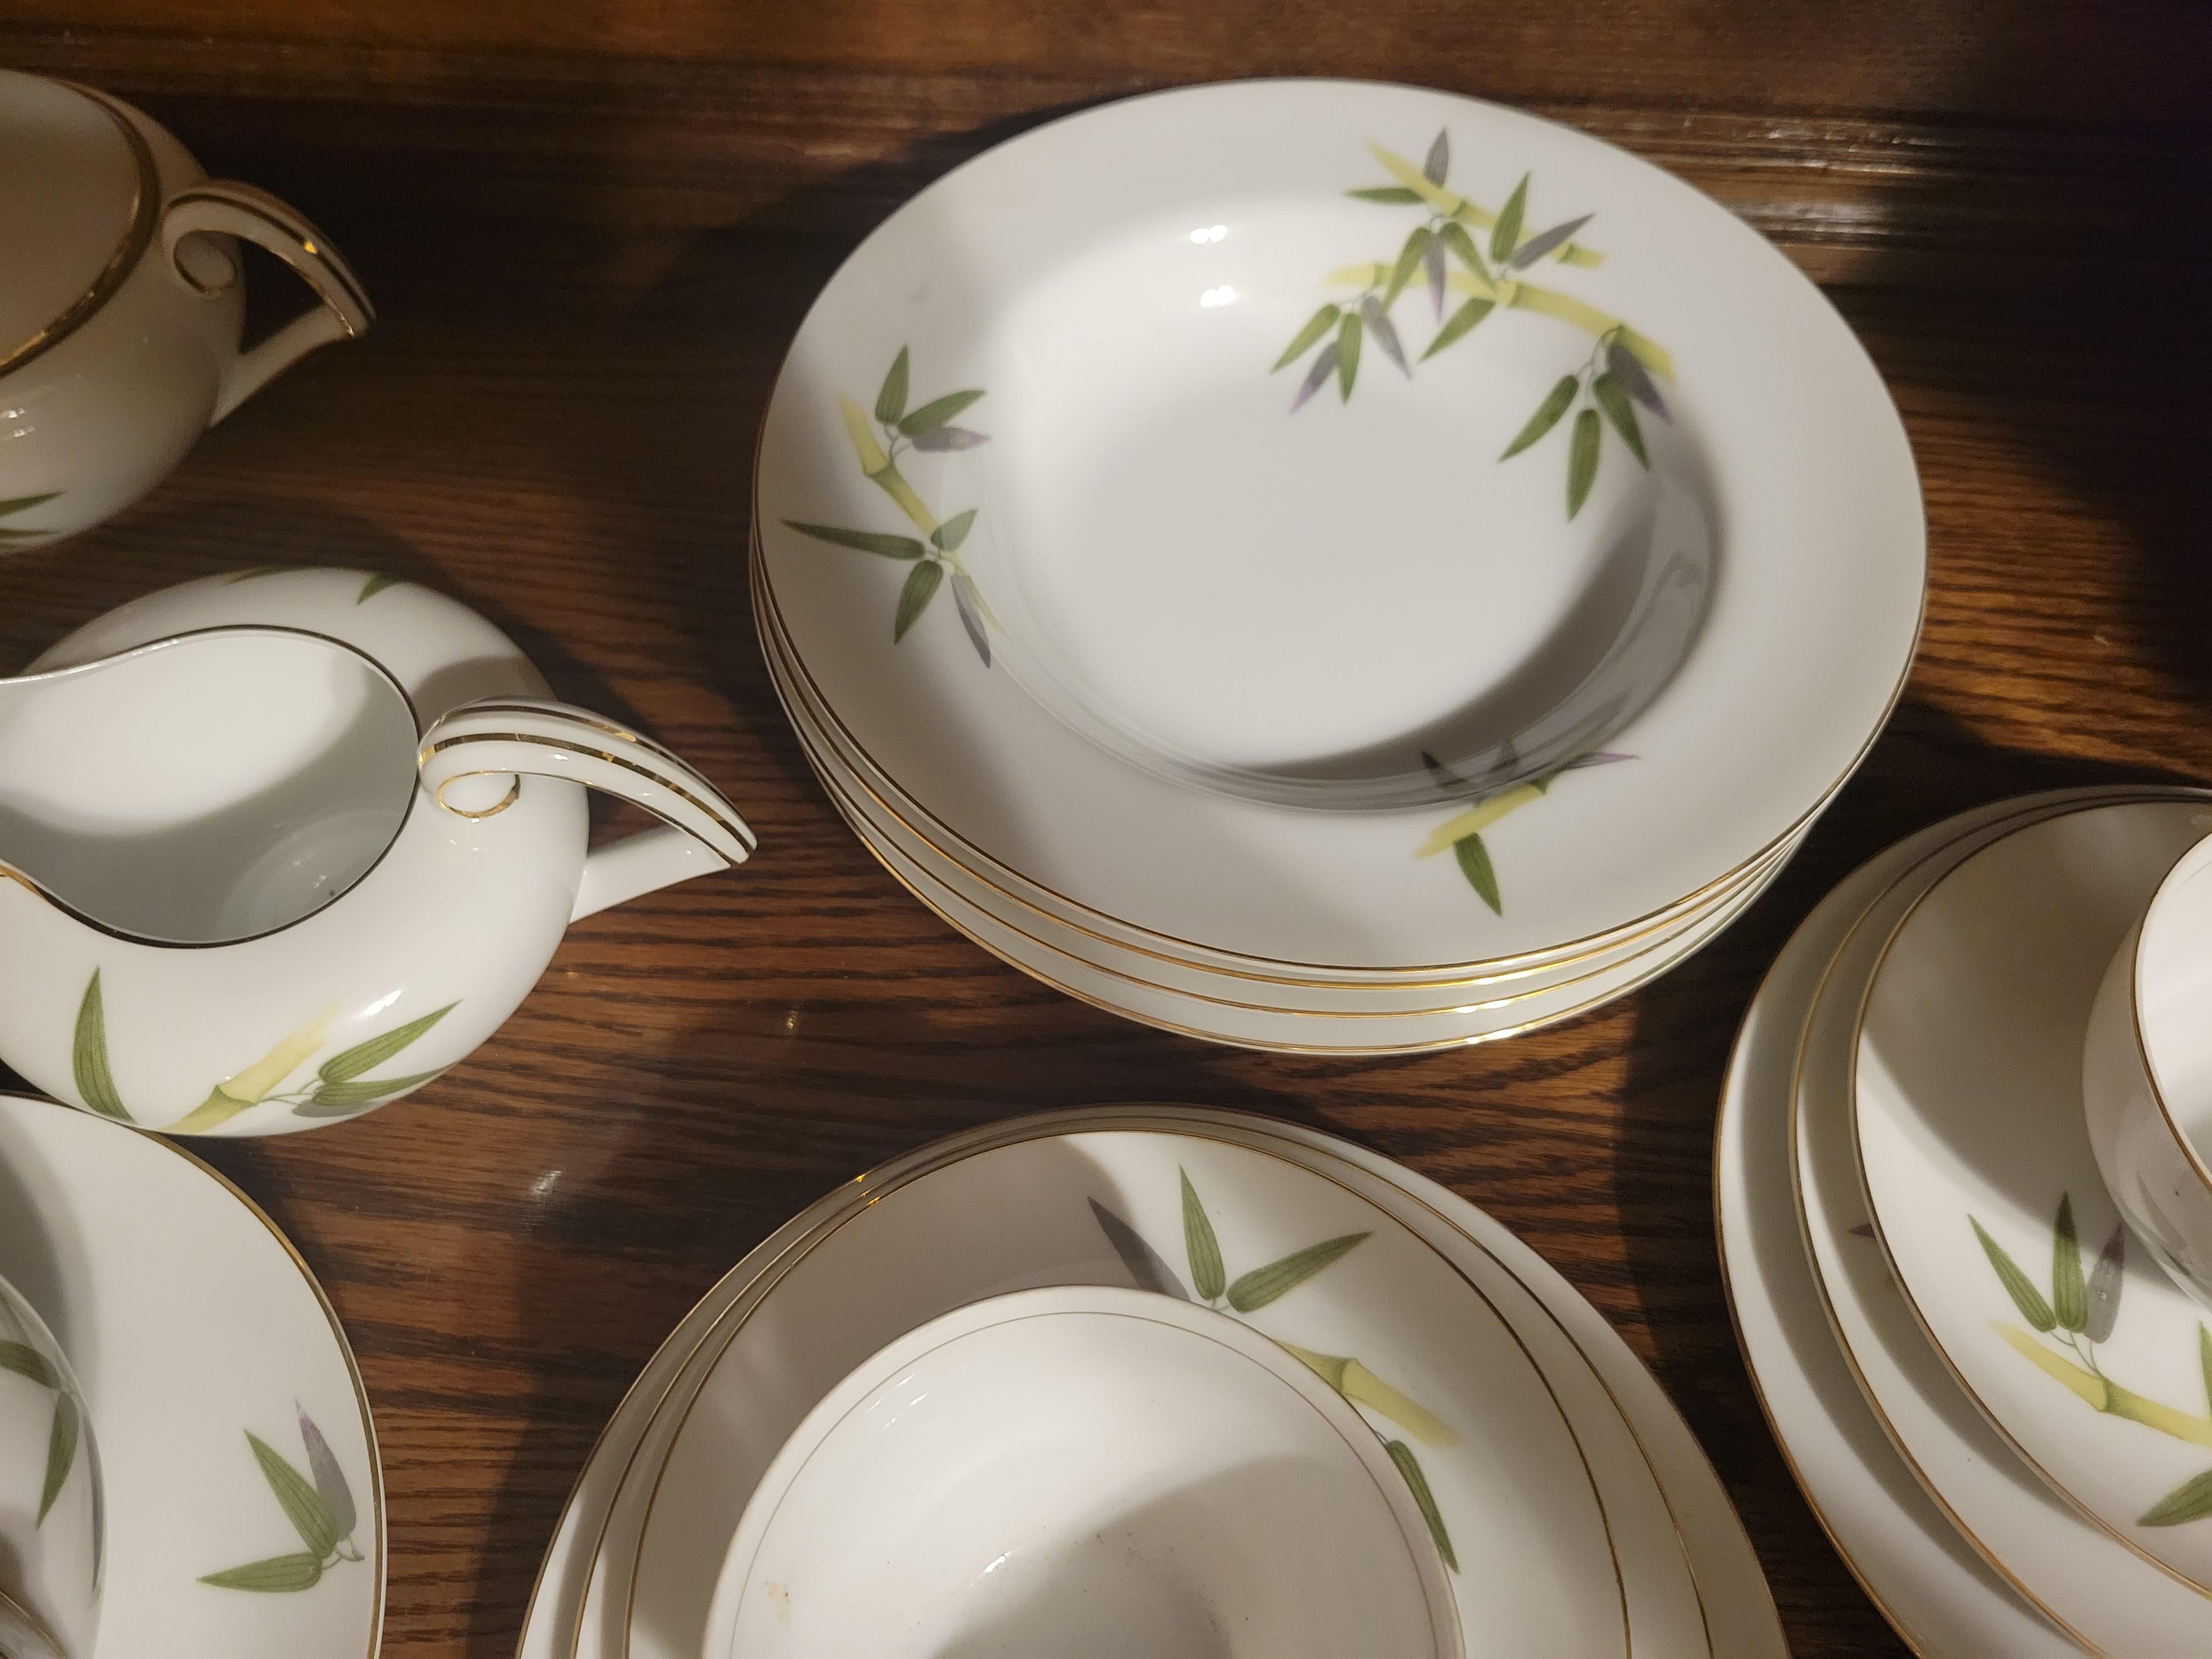 Porcelain 1951 Narumi Japan 'Spring Bamboo' Fine China Set - 24 pieces plus replacements  For Sale